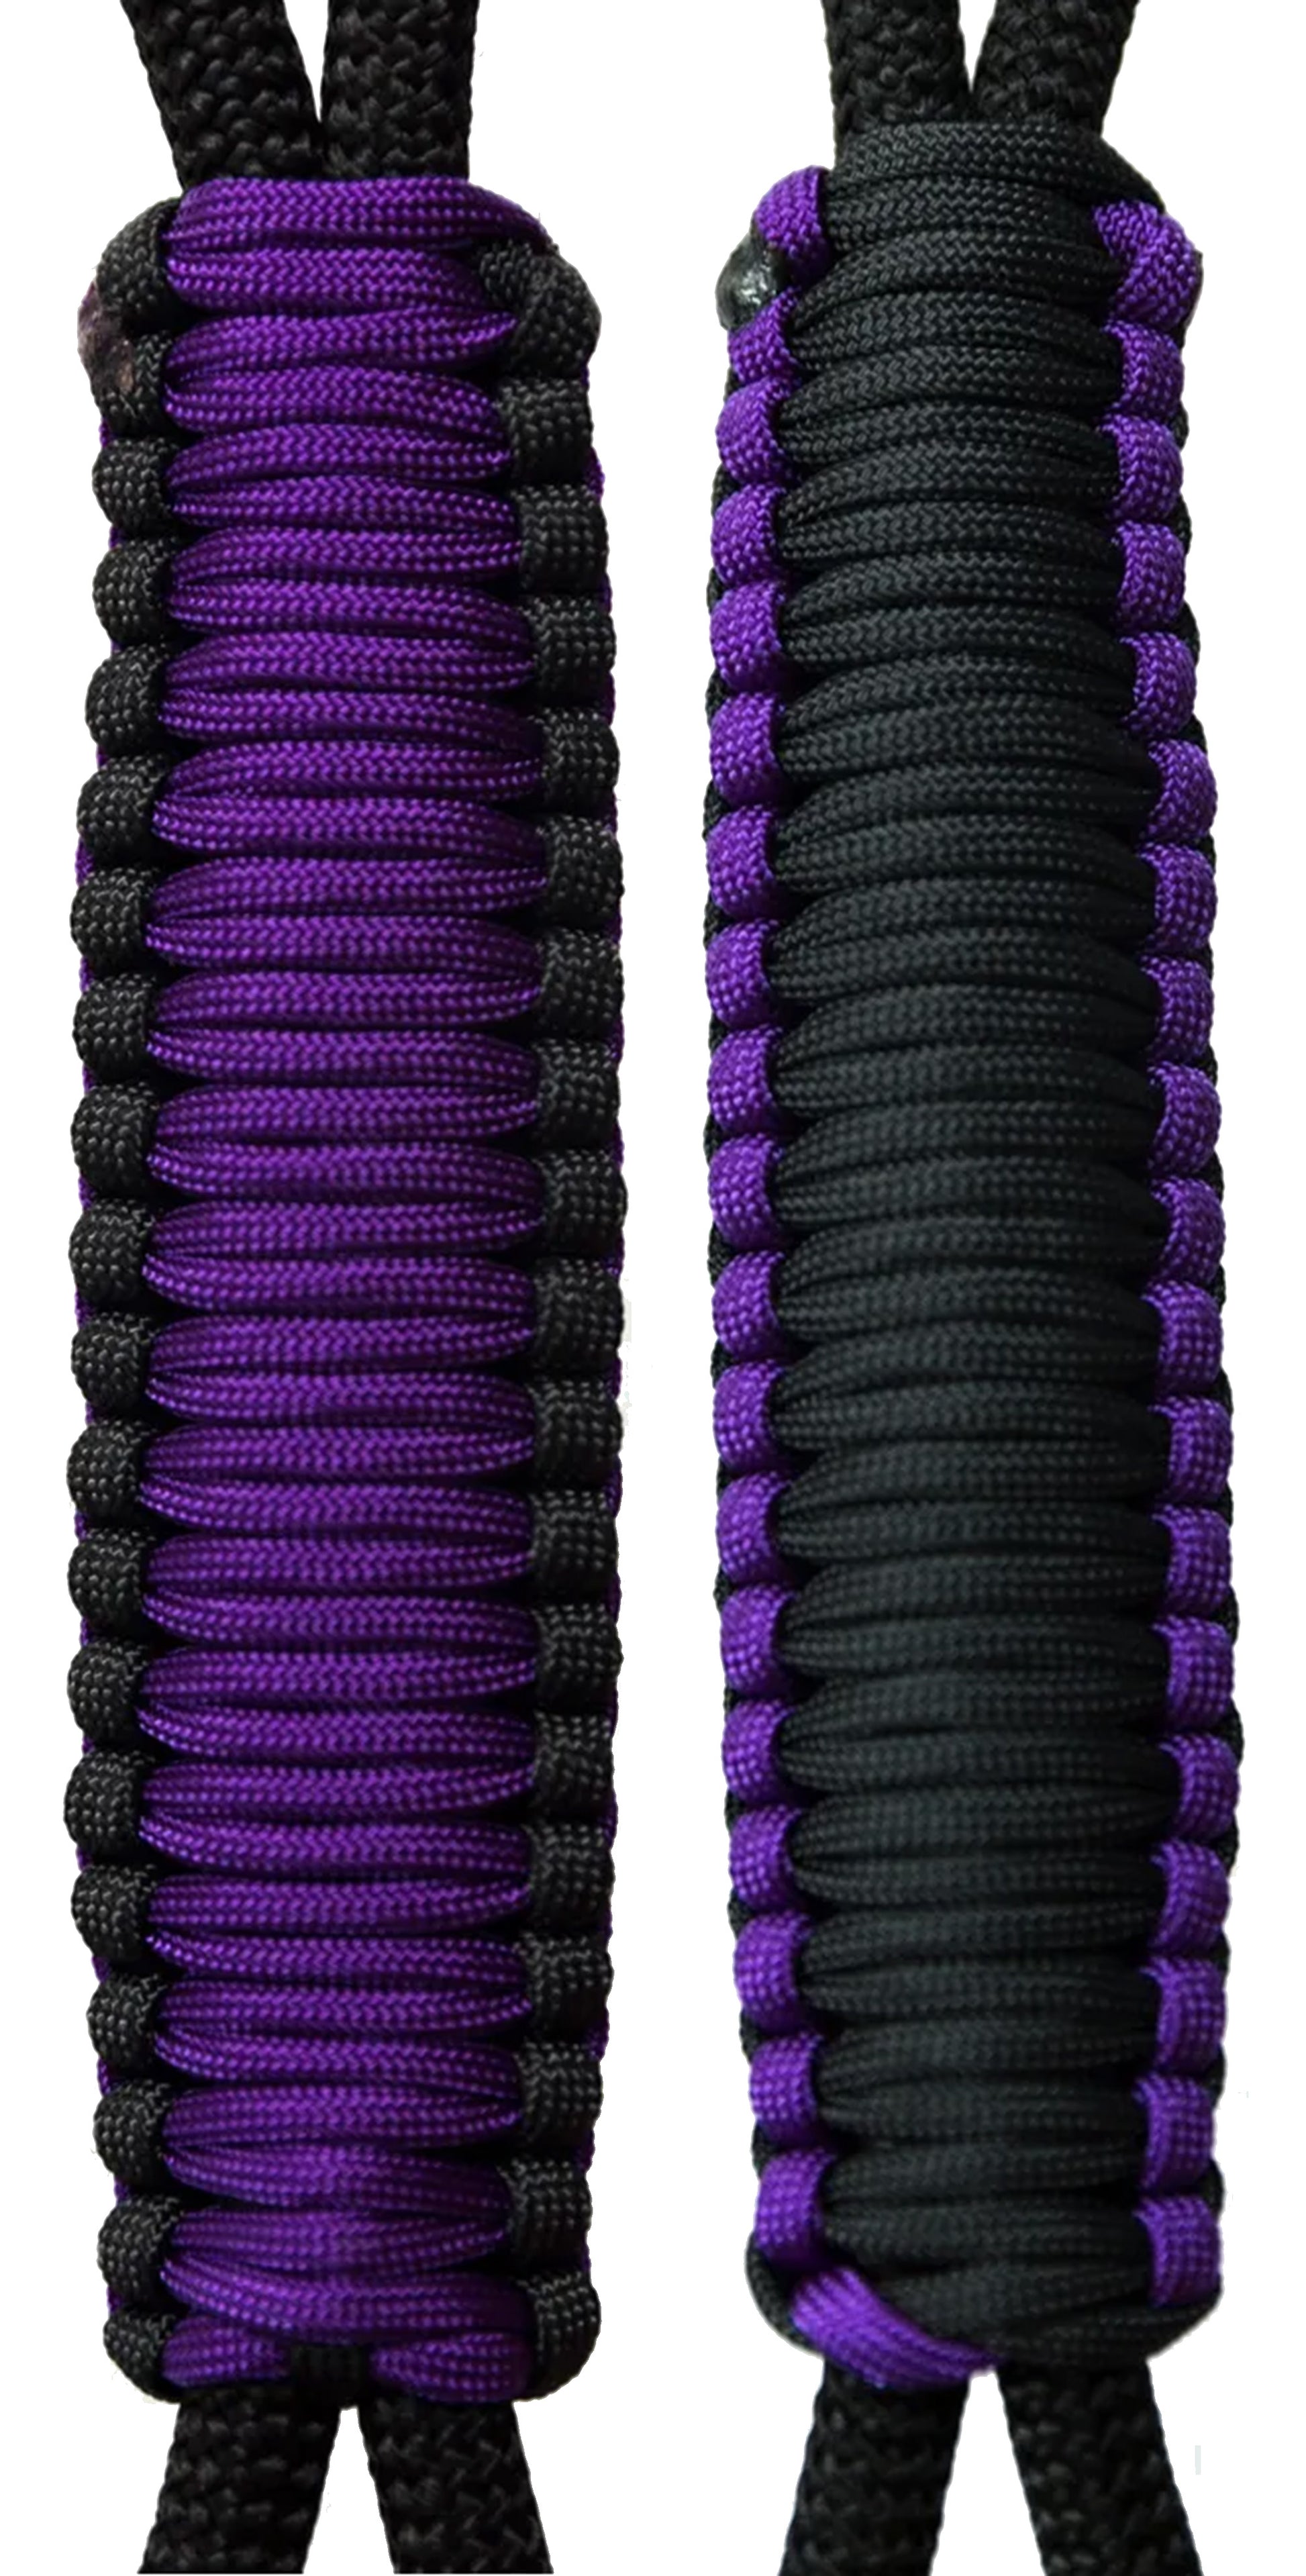 Purple & Black C024C031 - Paracord Handmade Handles for Stainless Steel Tumblers - Made in USA!